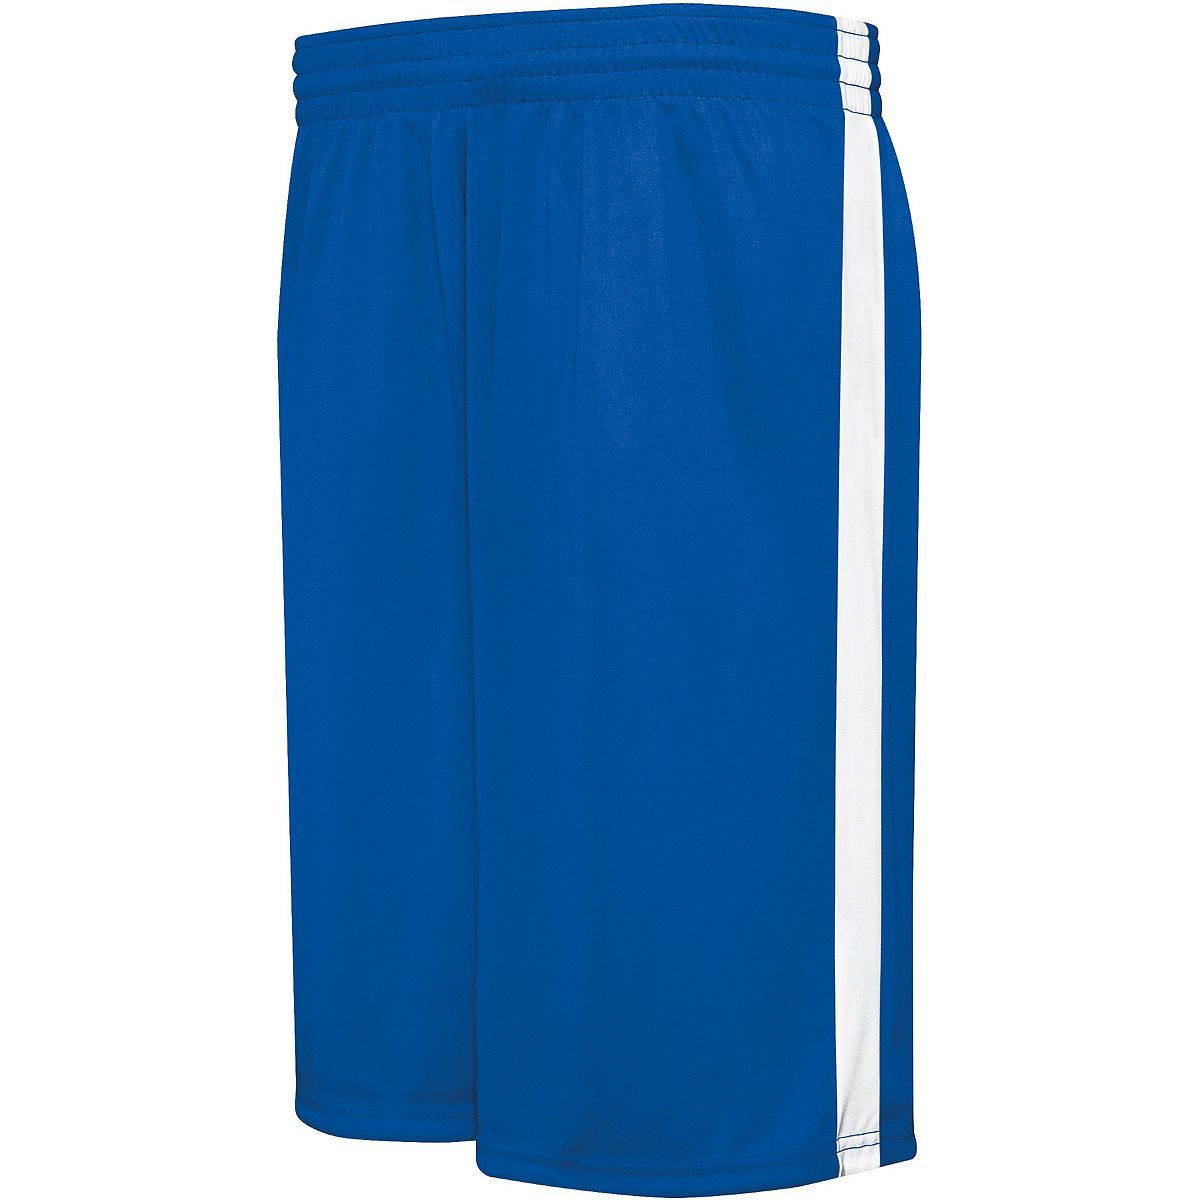 Augusta Sportswear Youth Competition Reversible Shorts in Royal/White  -Part of the Youth, Youth-Shorts, Augusta-Products, Basketball, All-Sports, All-Sports-1 product lines at KanaleyCreations.com